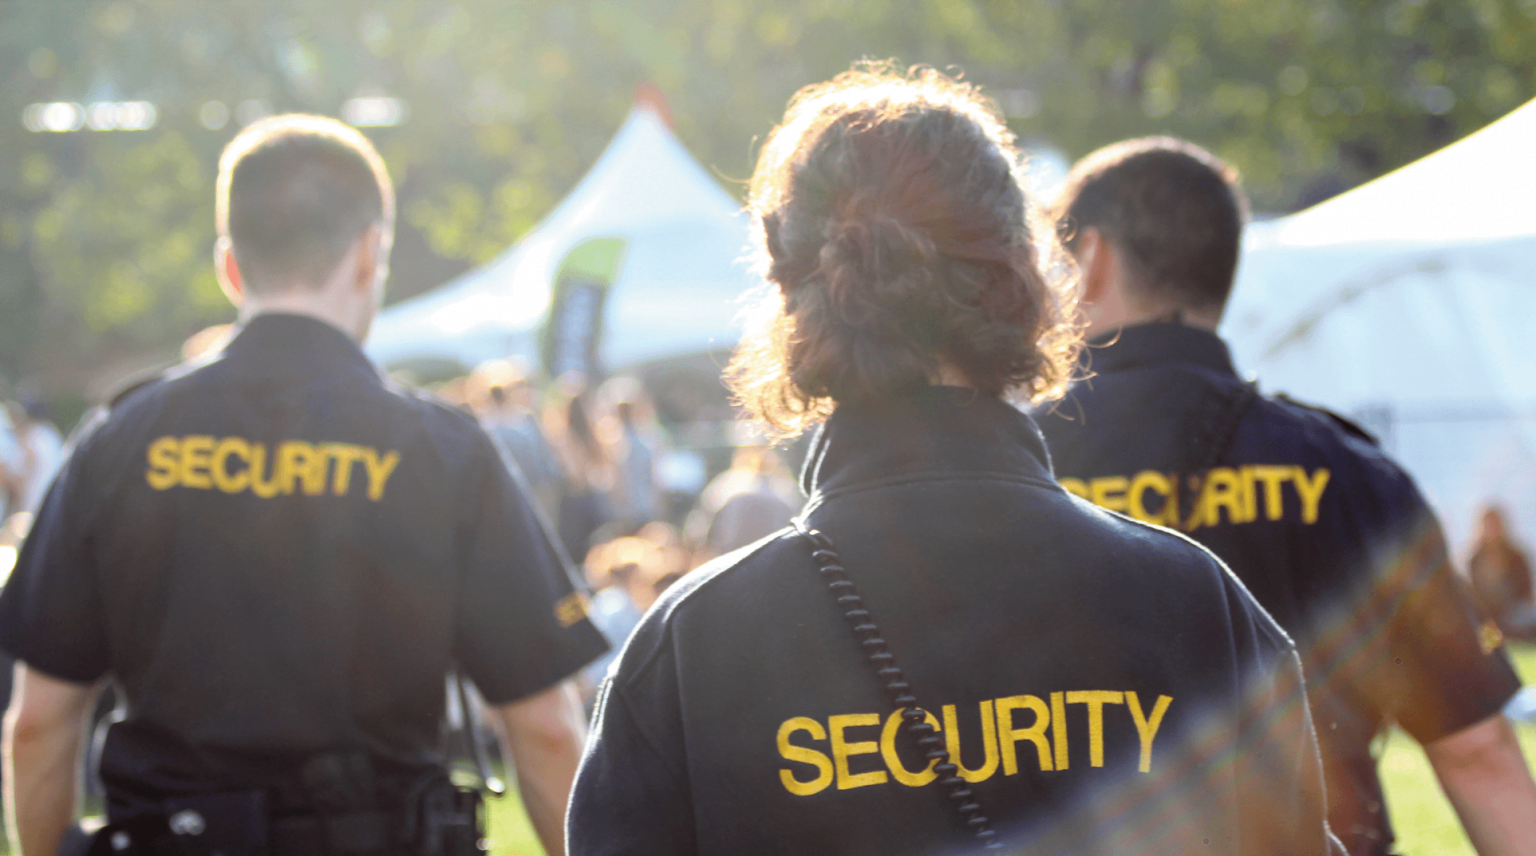 Lack of Security at a Florida Event